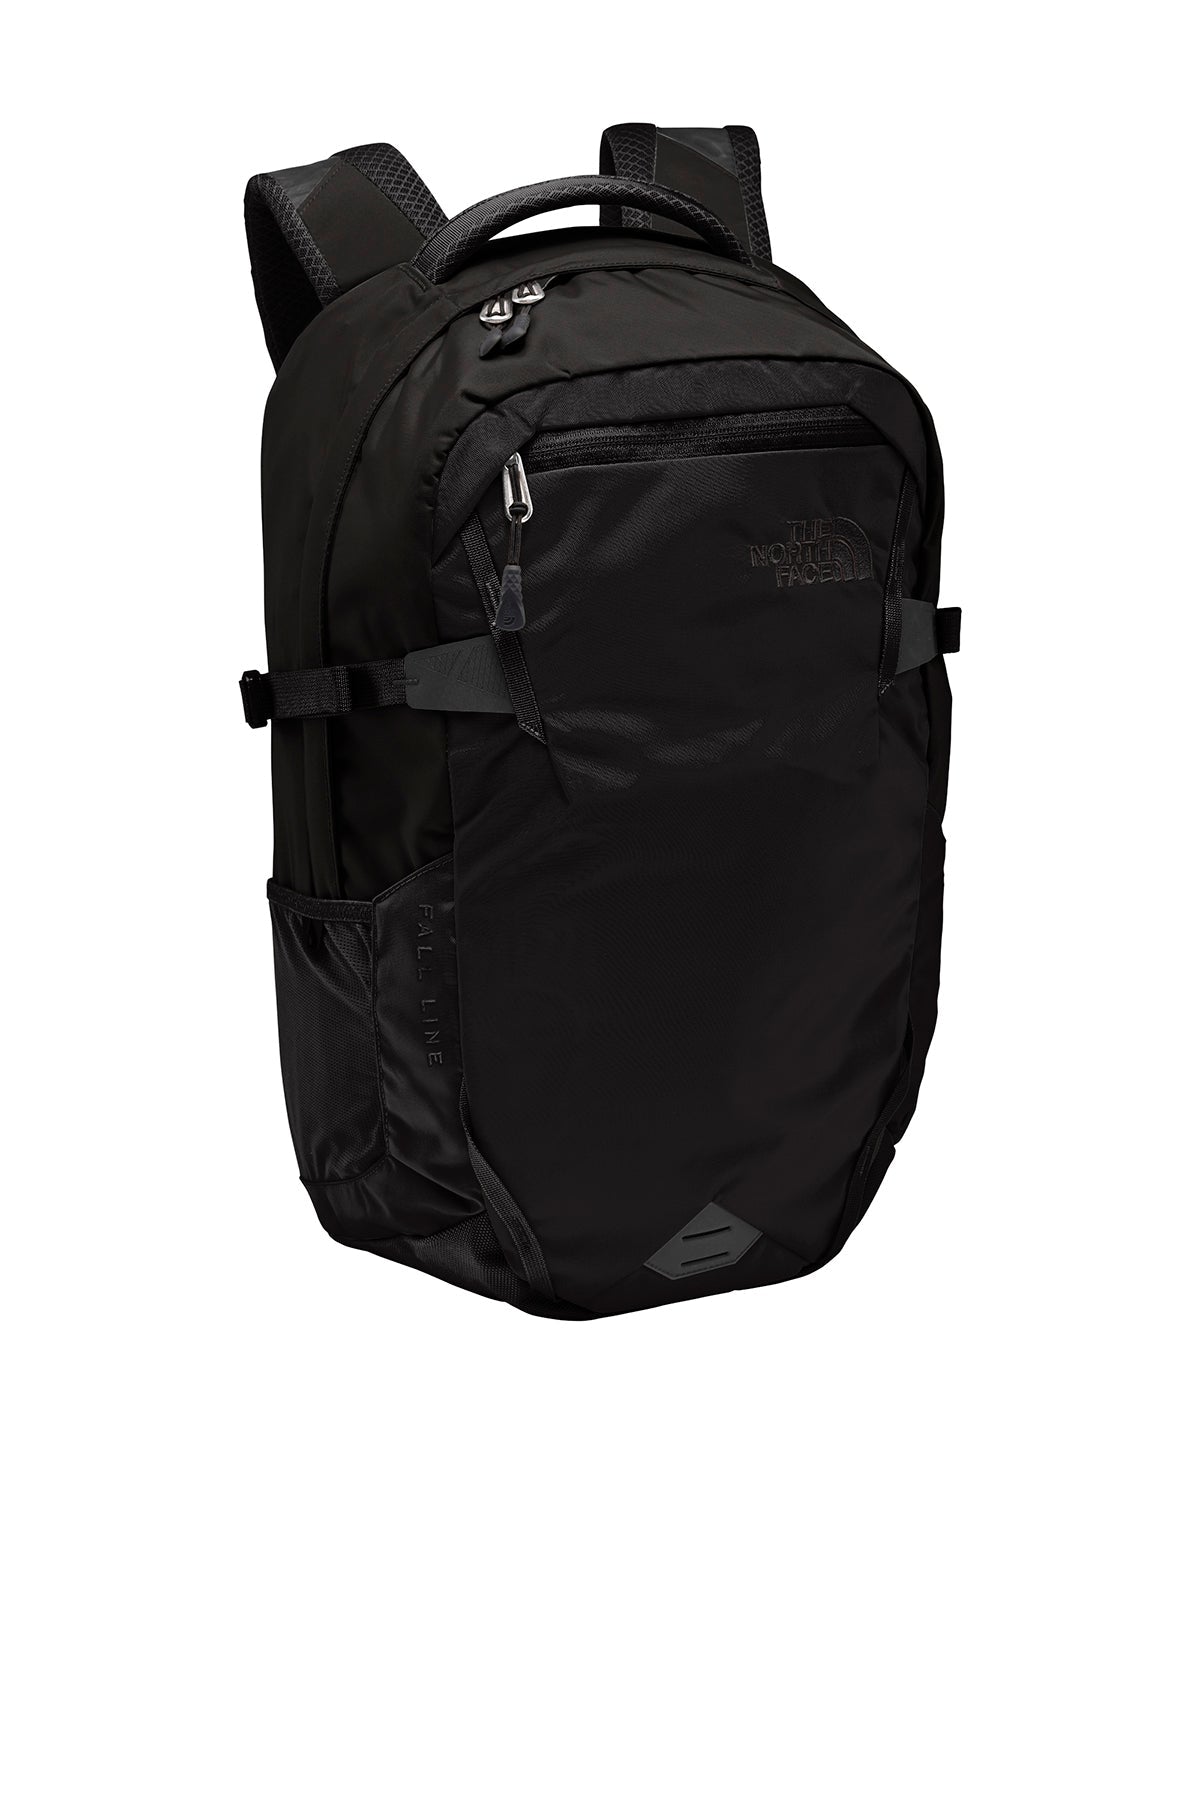 North Face Fall Line Backpack TNF Black Heather